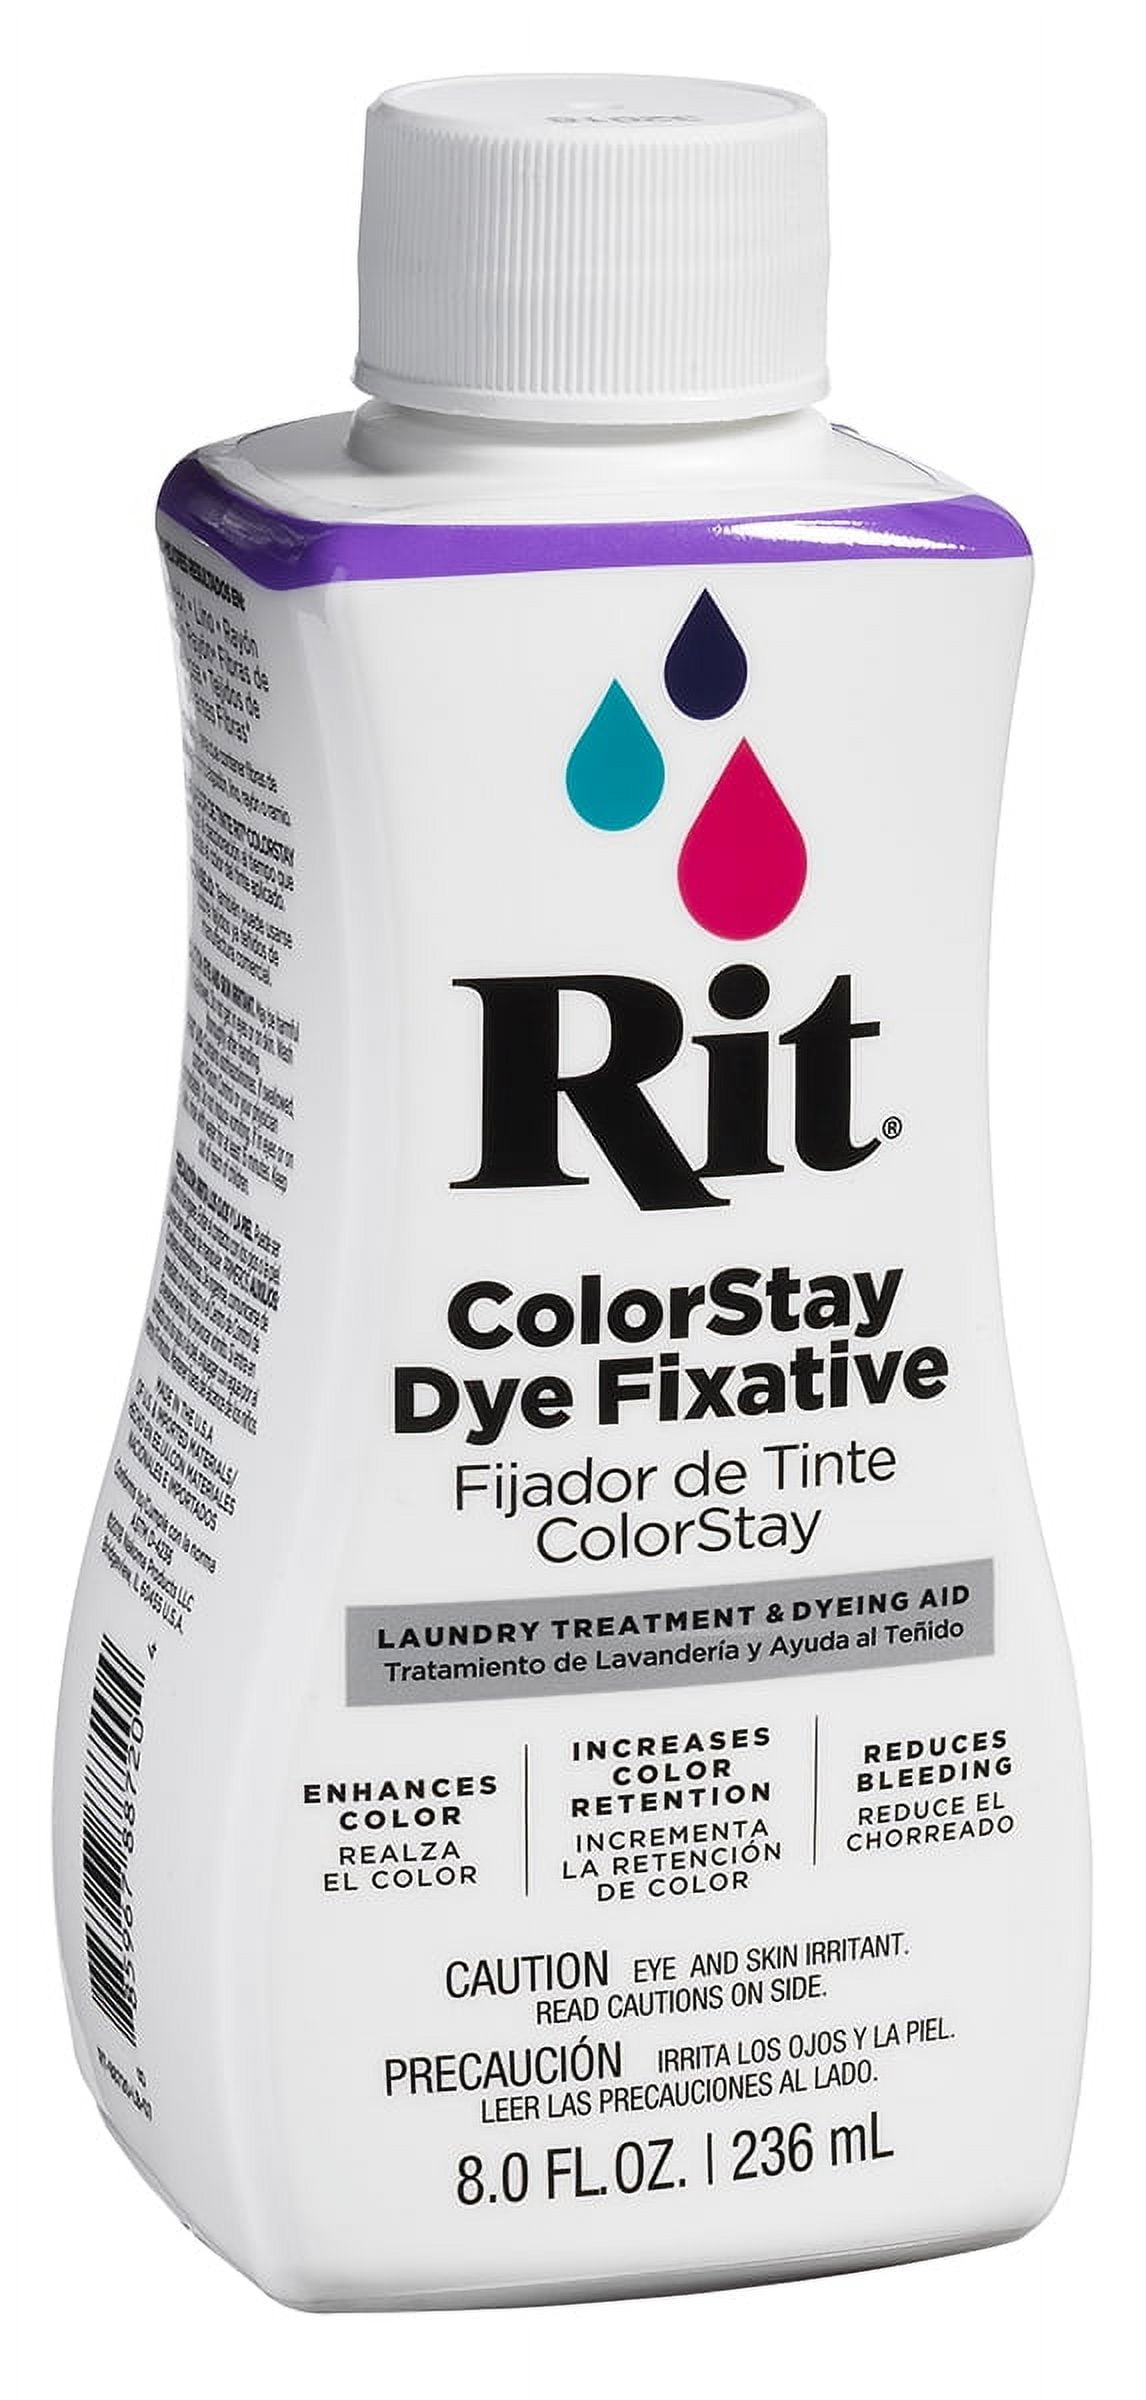 Rit Colorstay Dye Fixative - Does it Make a Difference when Dyeing